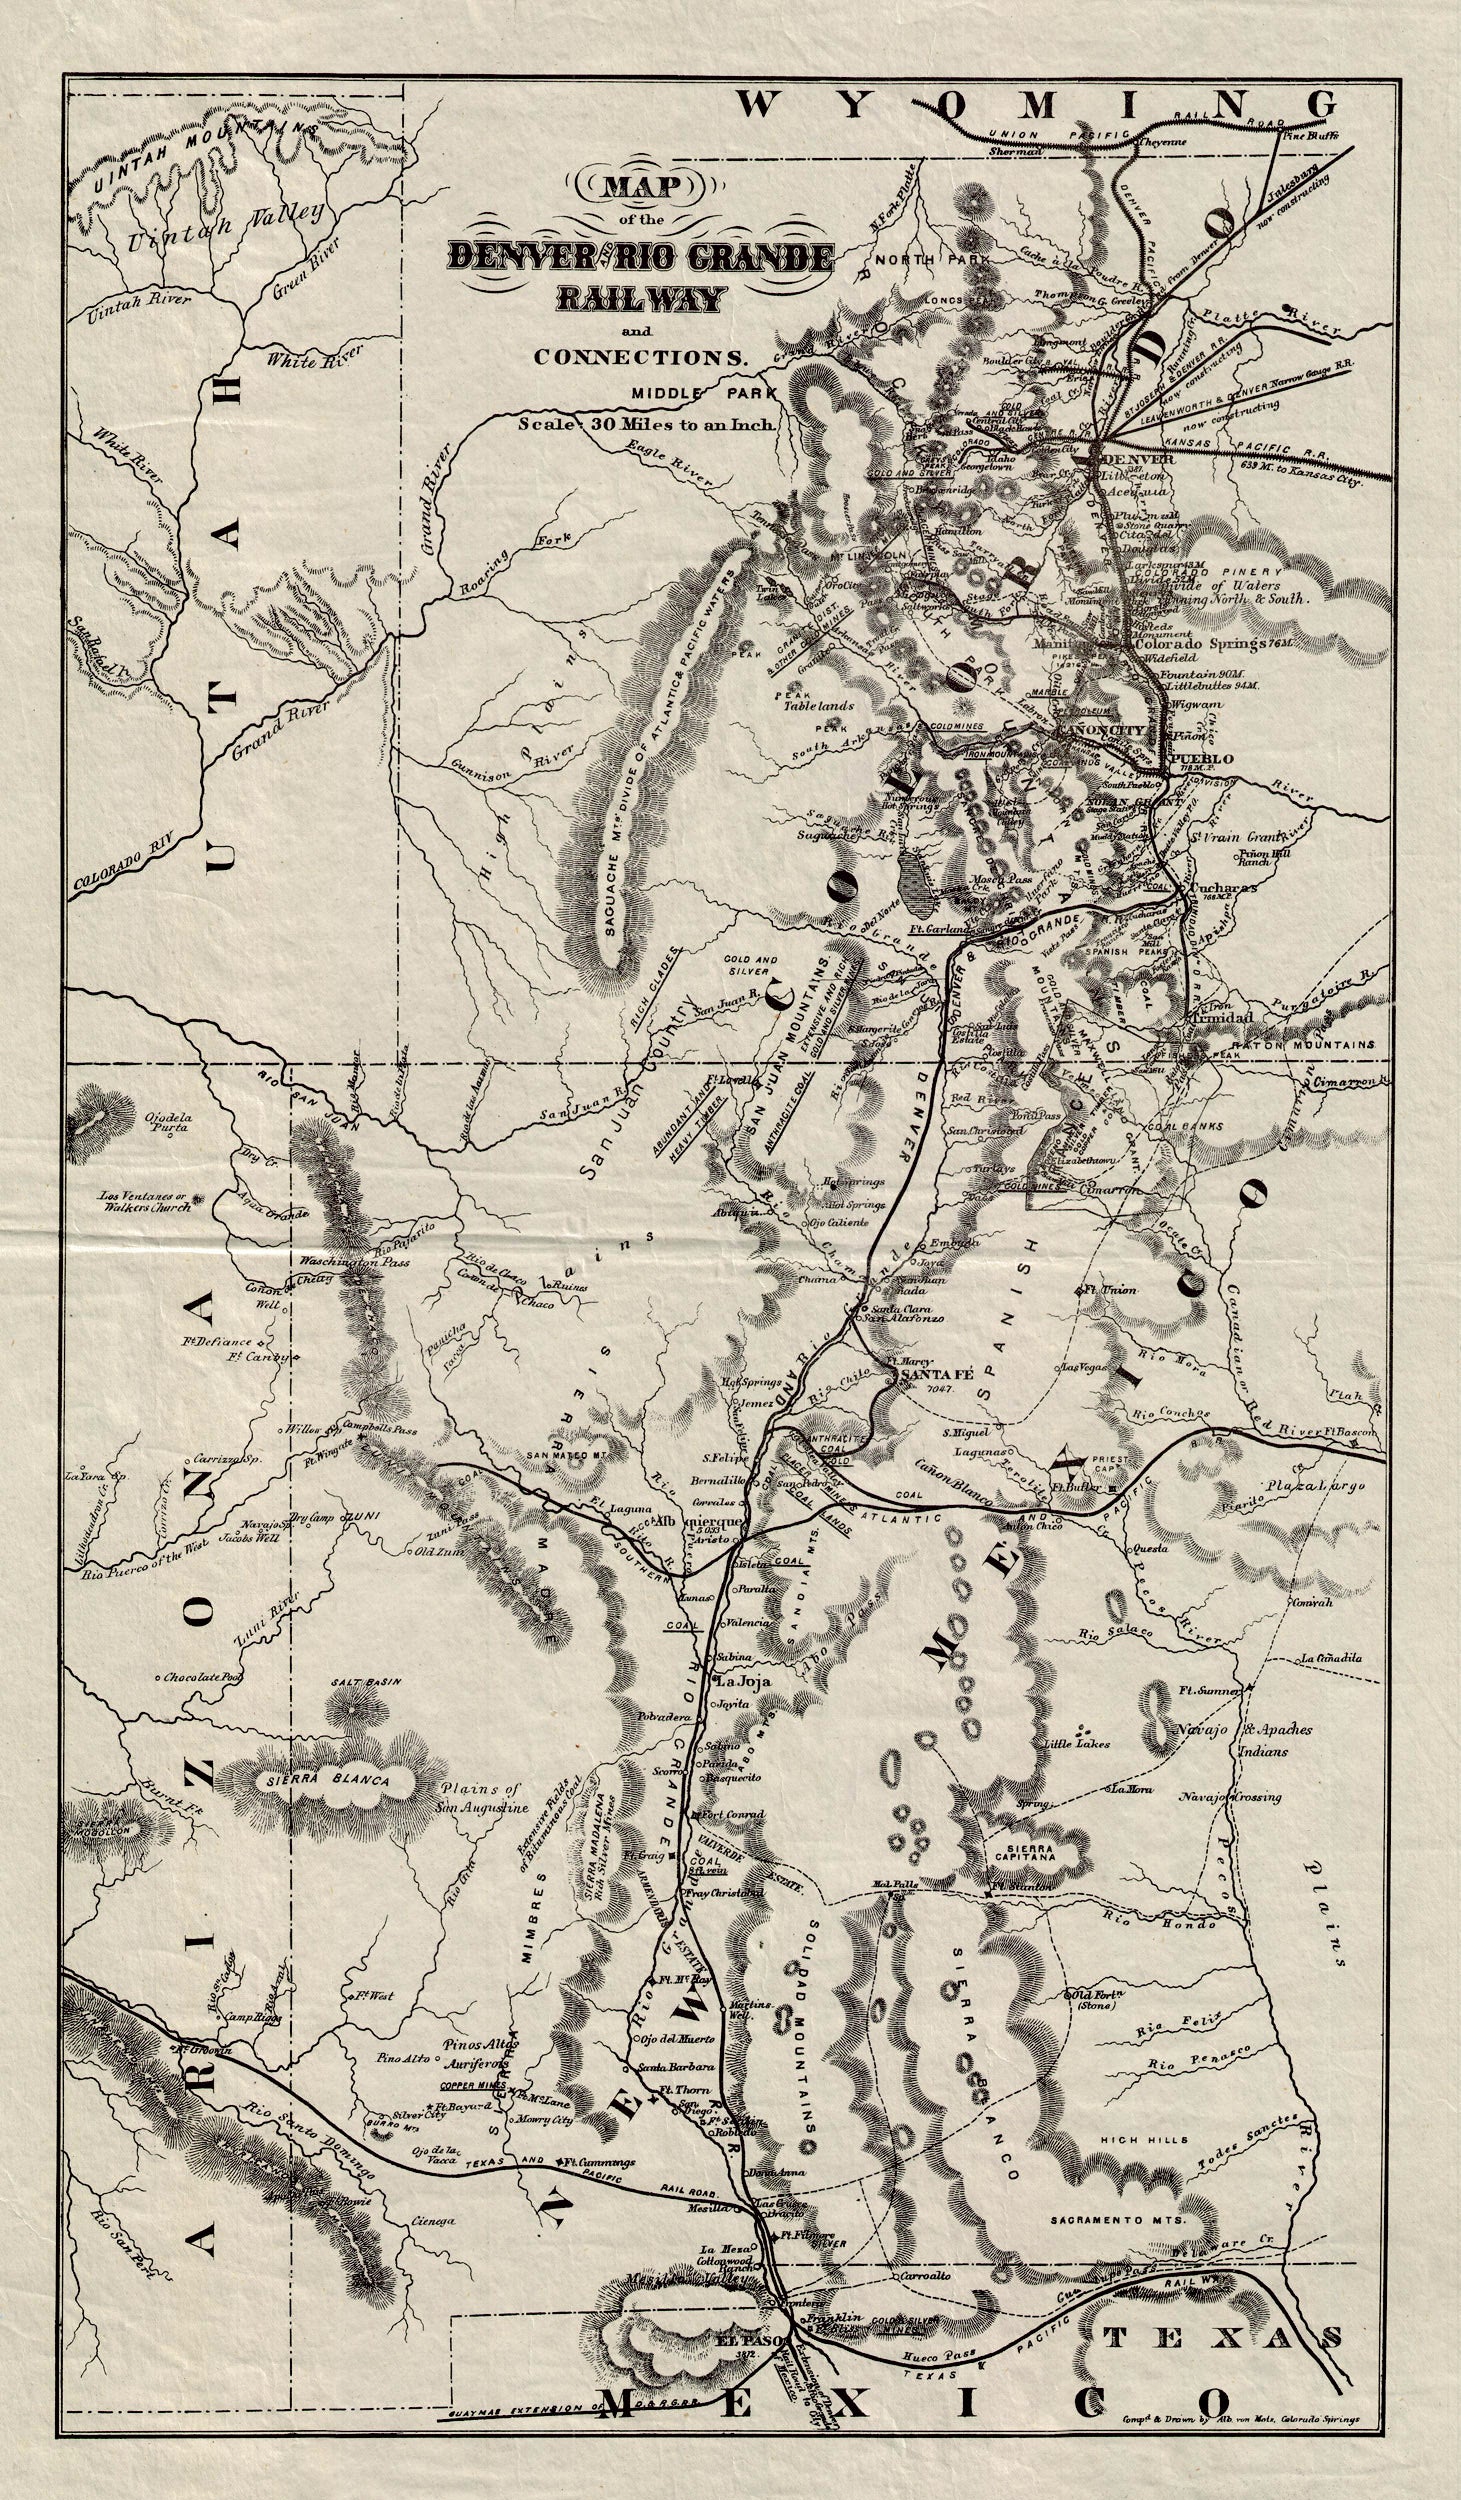 (CO. - Railroads) Map of the Denver And Rio Grande Railway and Connections